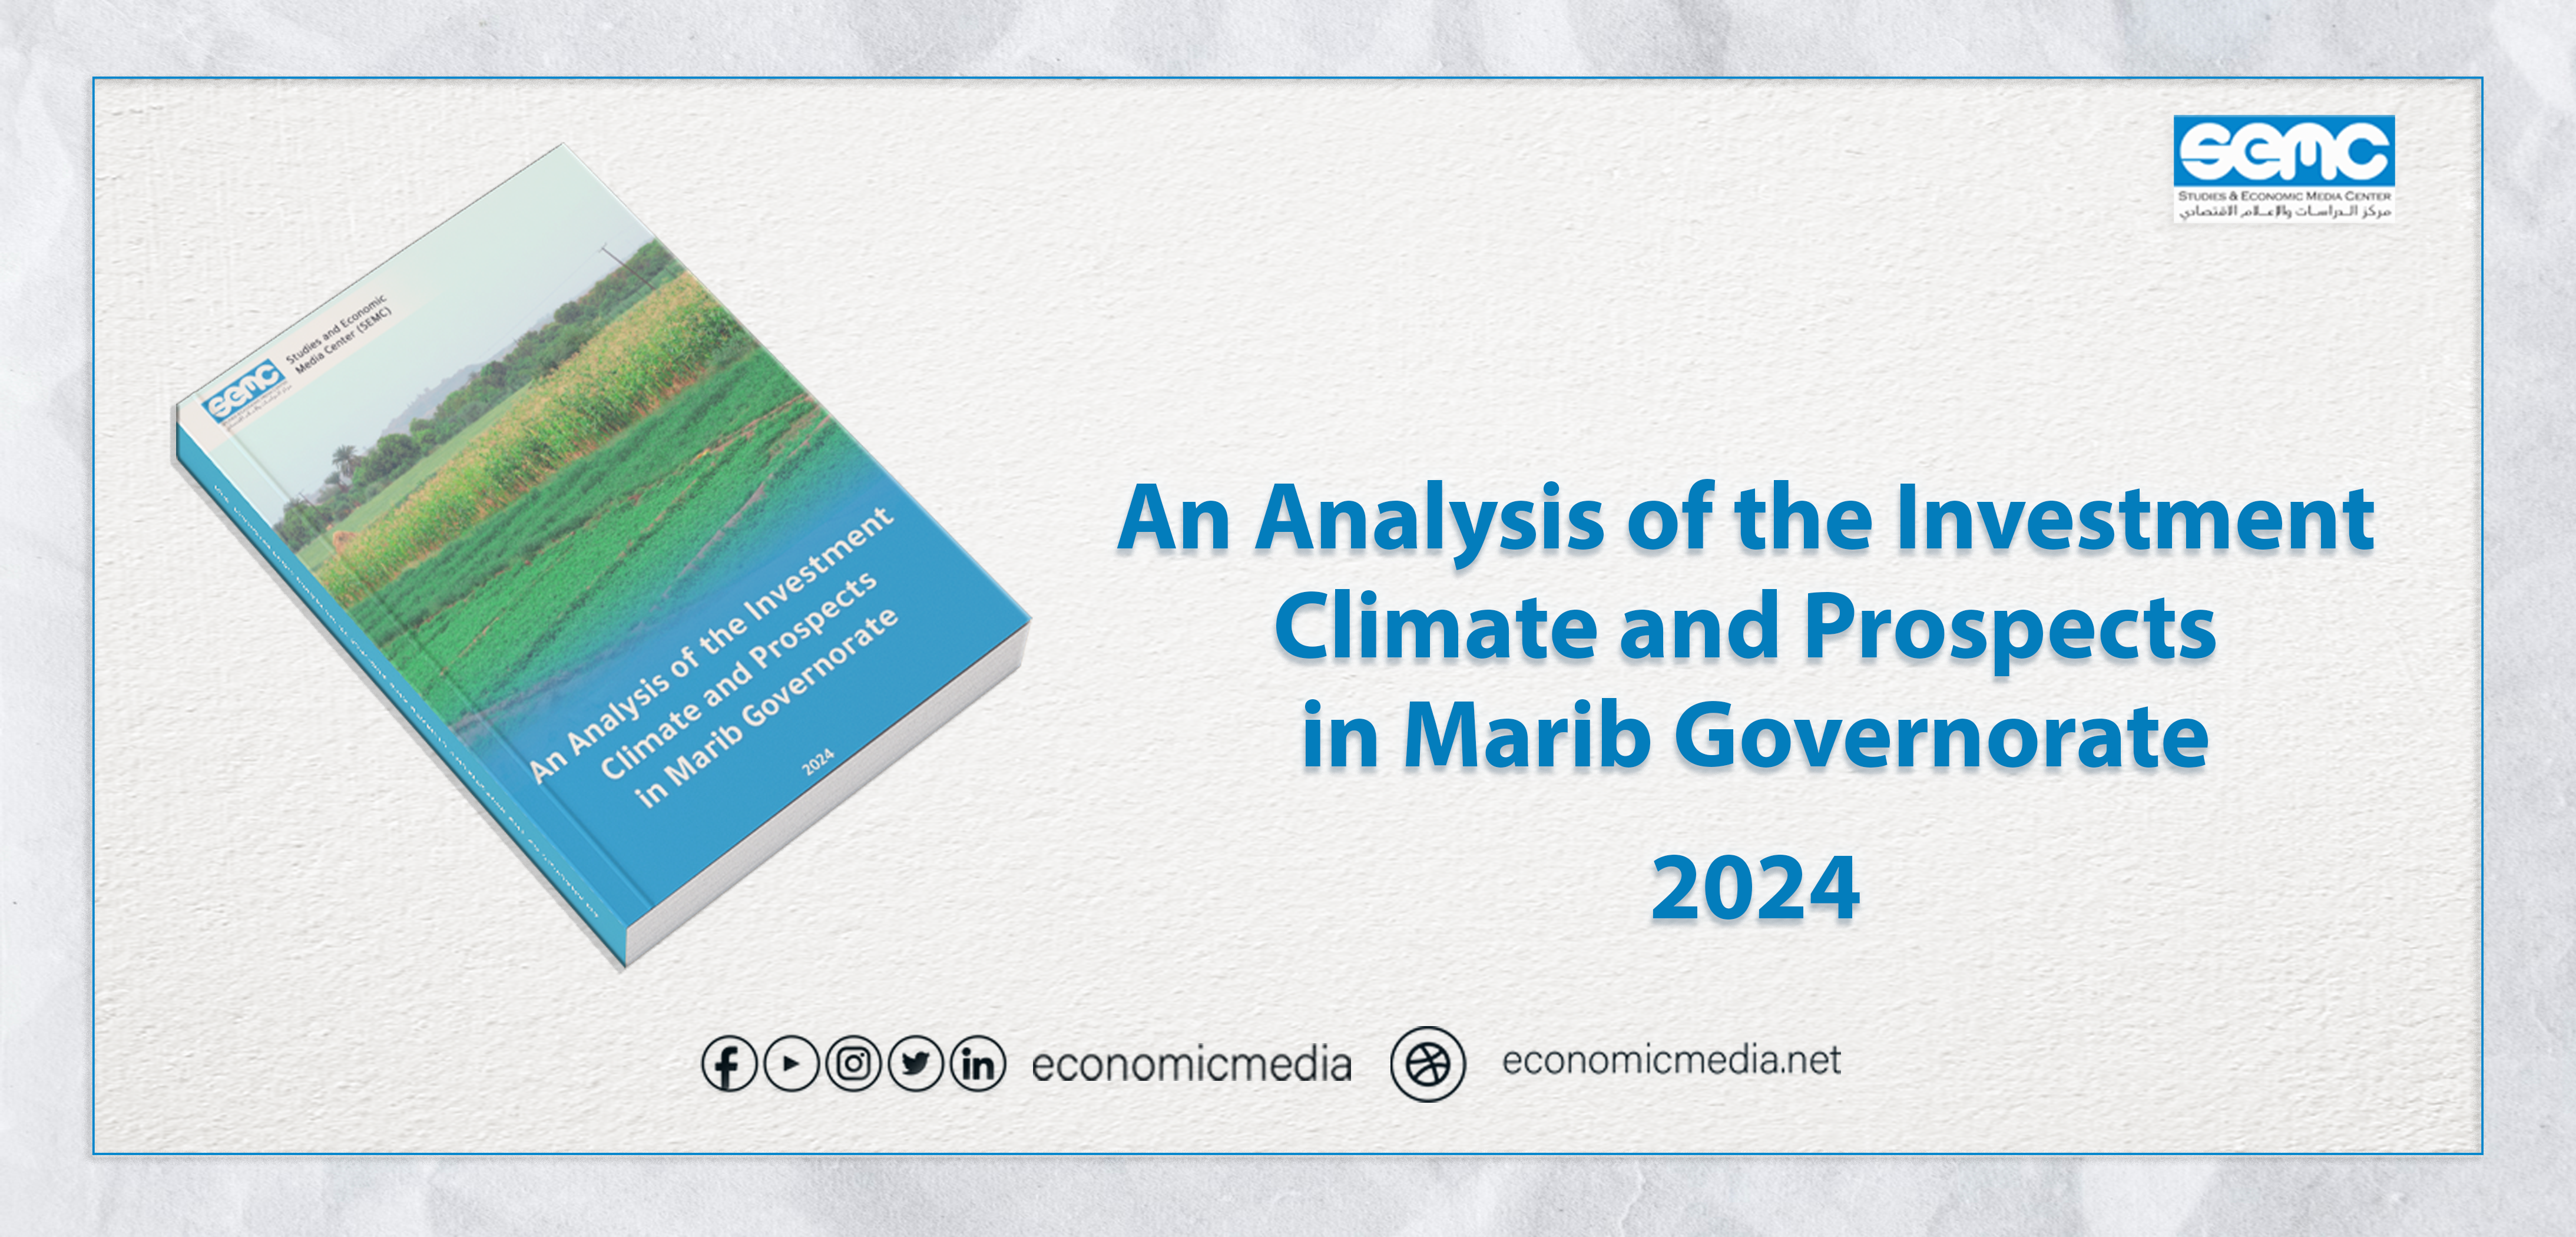 Proposals for Developing Investment Climate in Marib Governorate